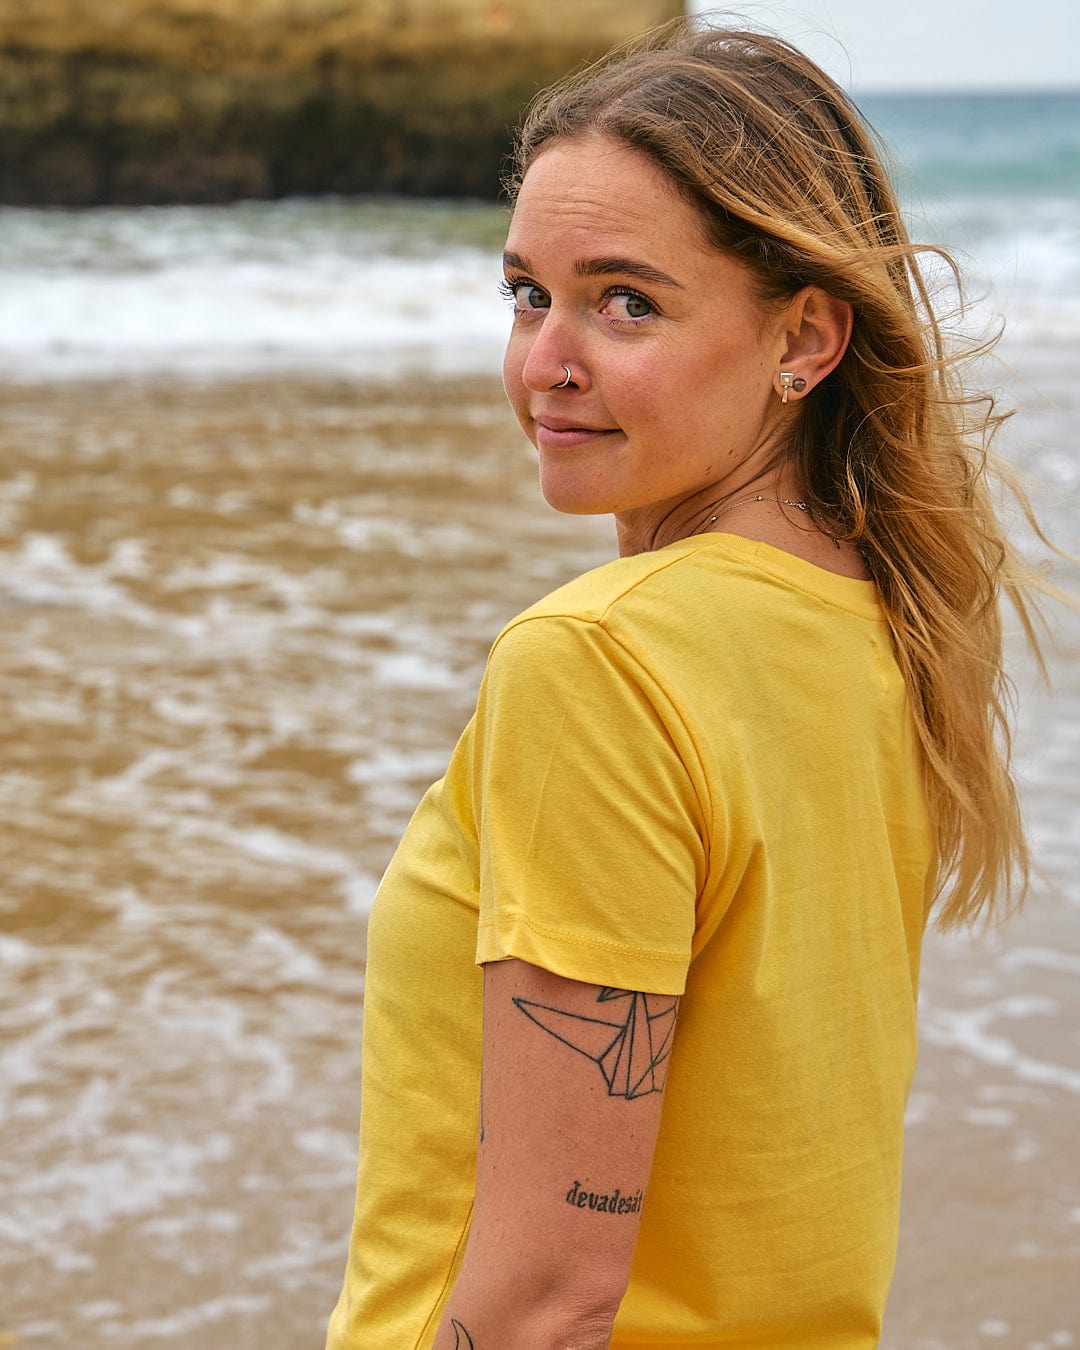 A woman wearing the Saltrock On The Road - Womens Short Sleeve T-Shirt - Yellow standing on the beach.